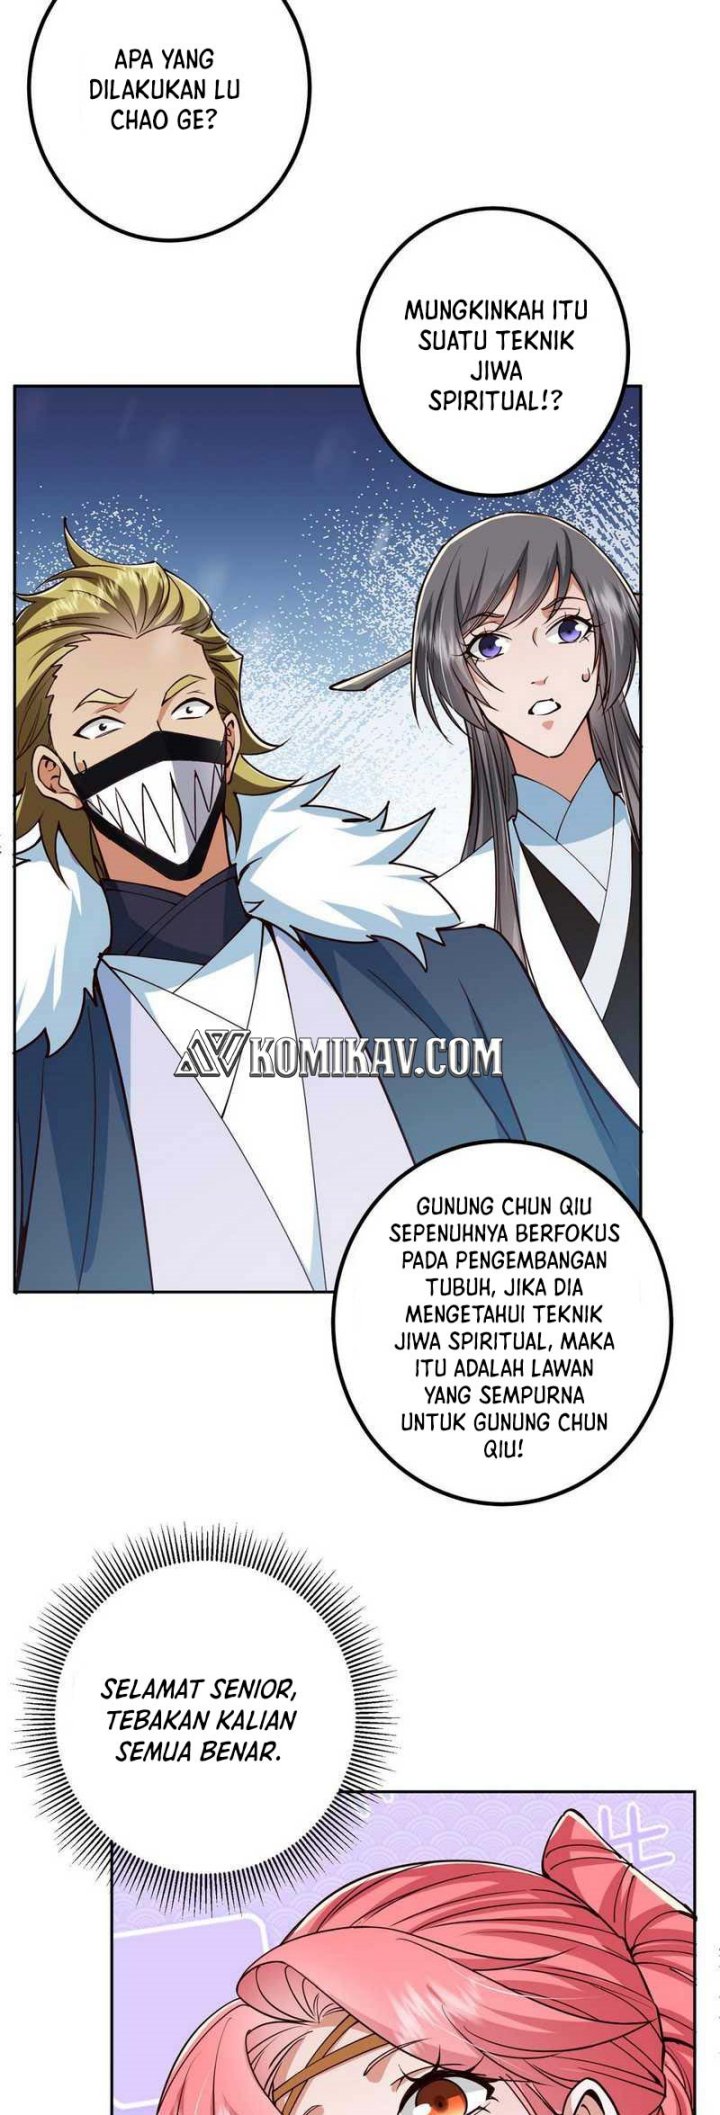 KomiknKeep A Low Profile, Sect Leader Chapter 264